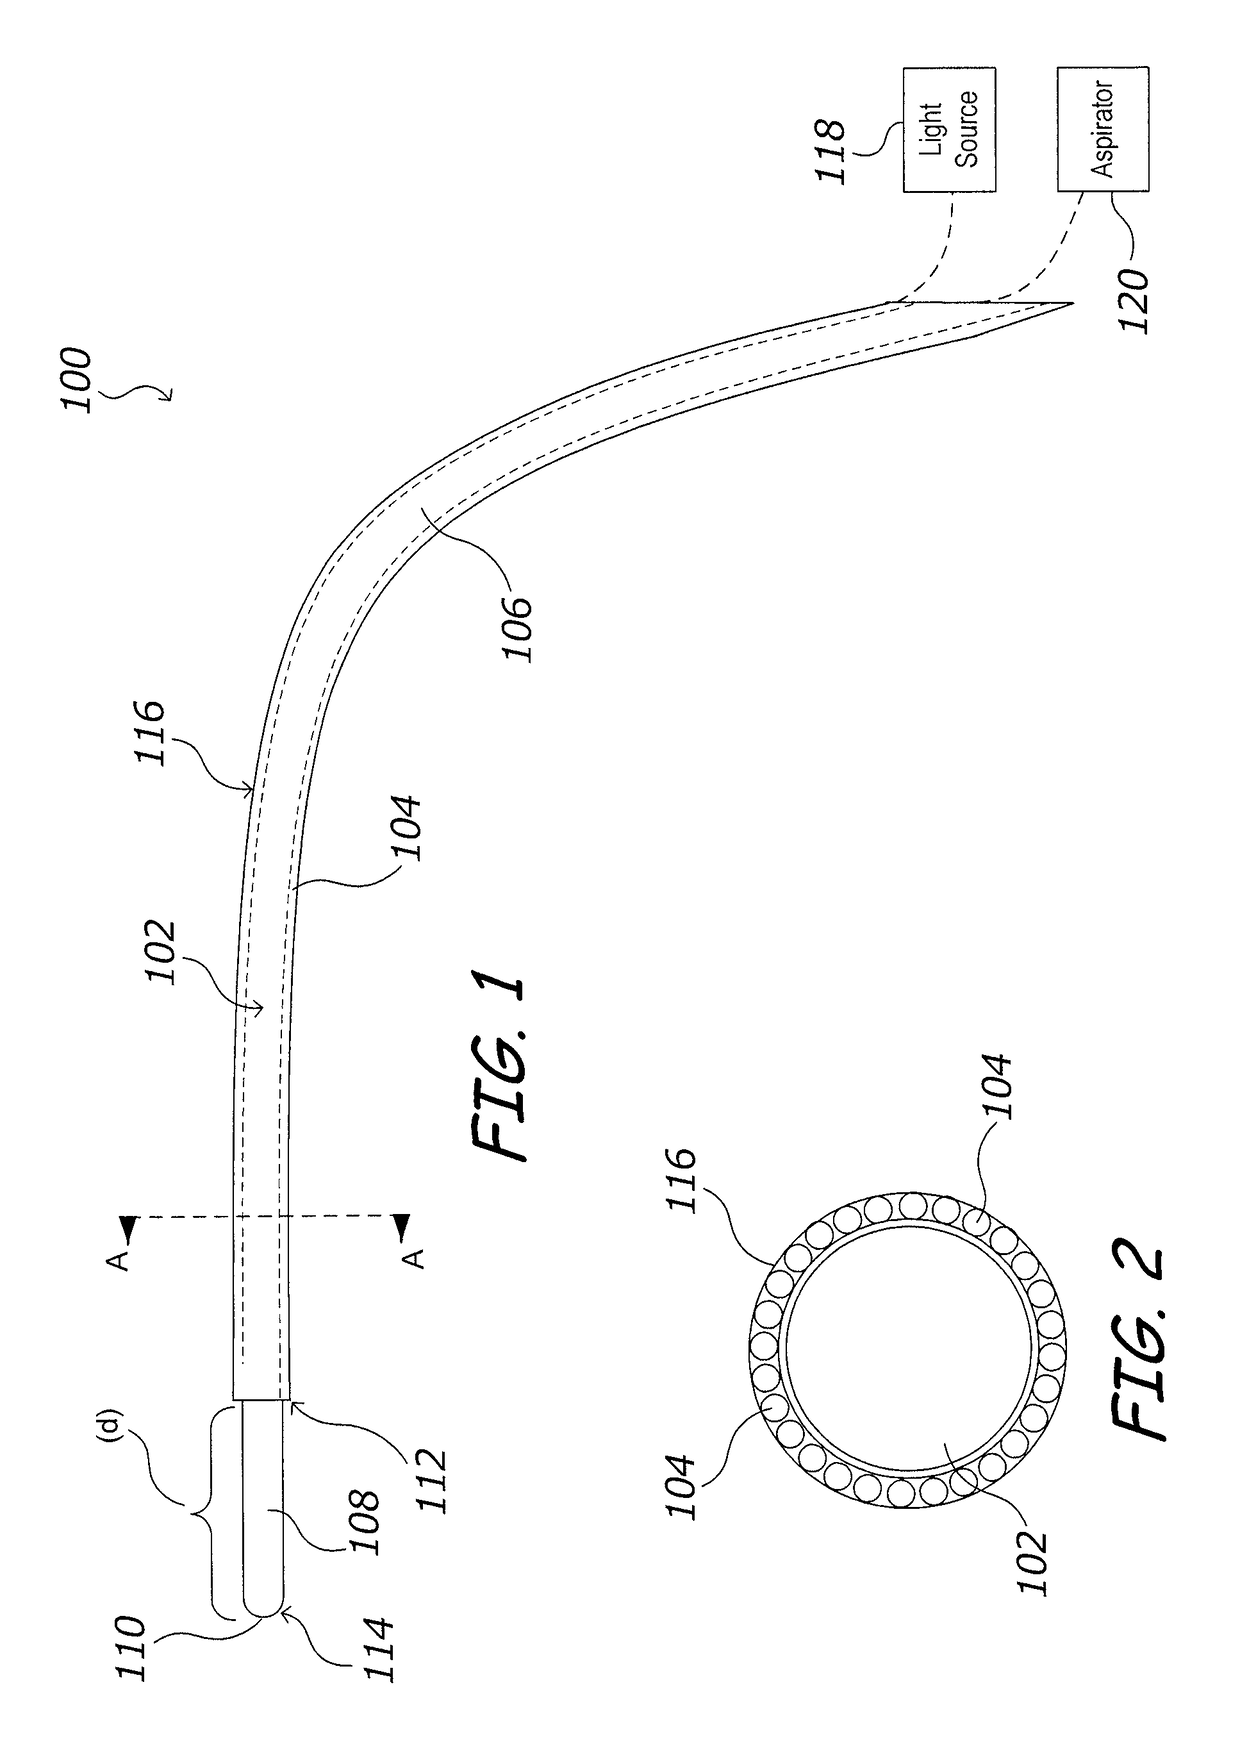 Multi-purpose surgical instrument with removable component